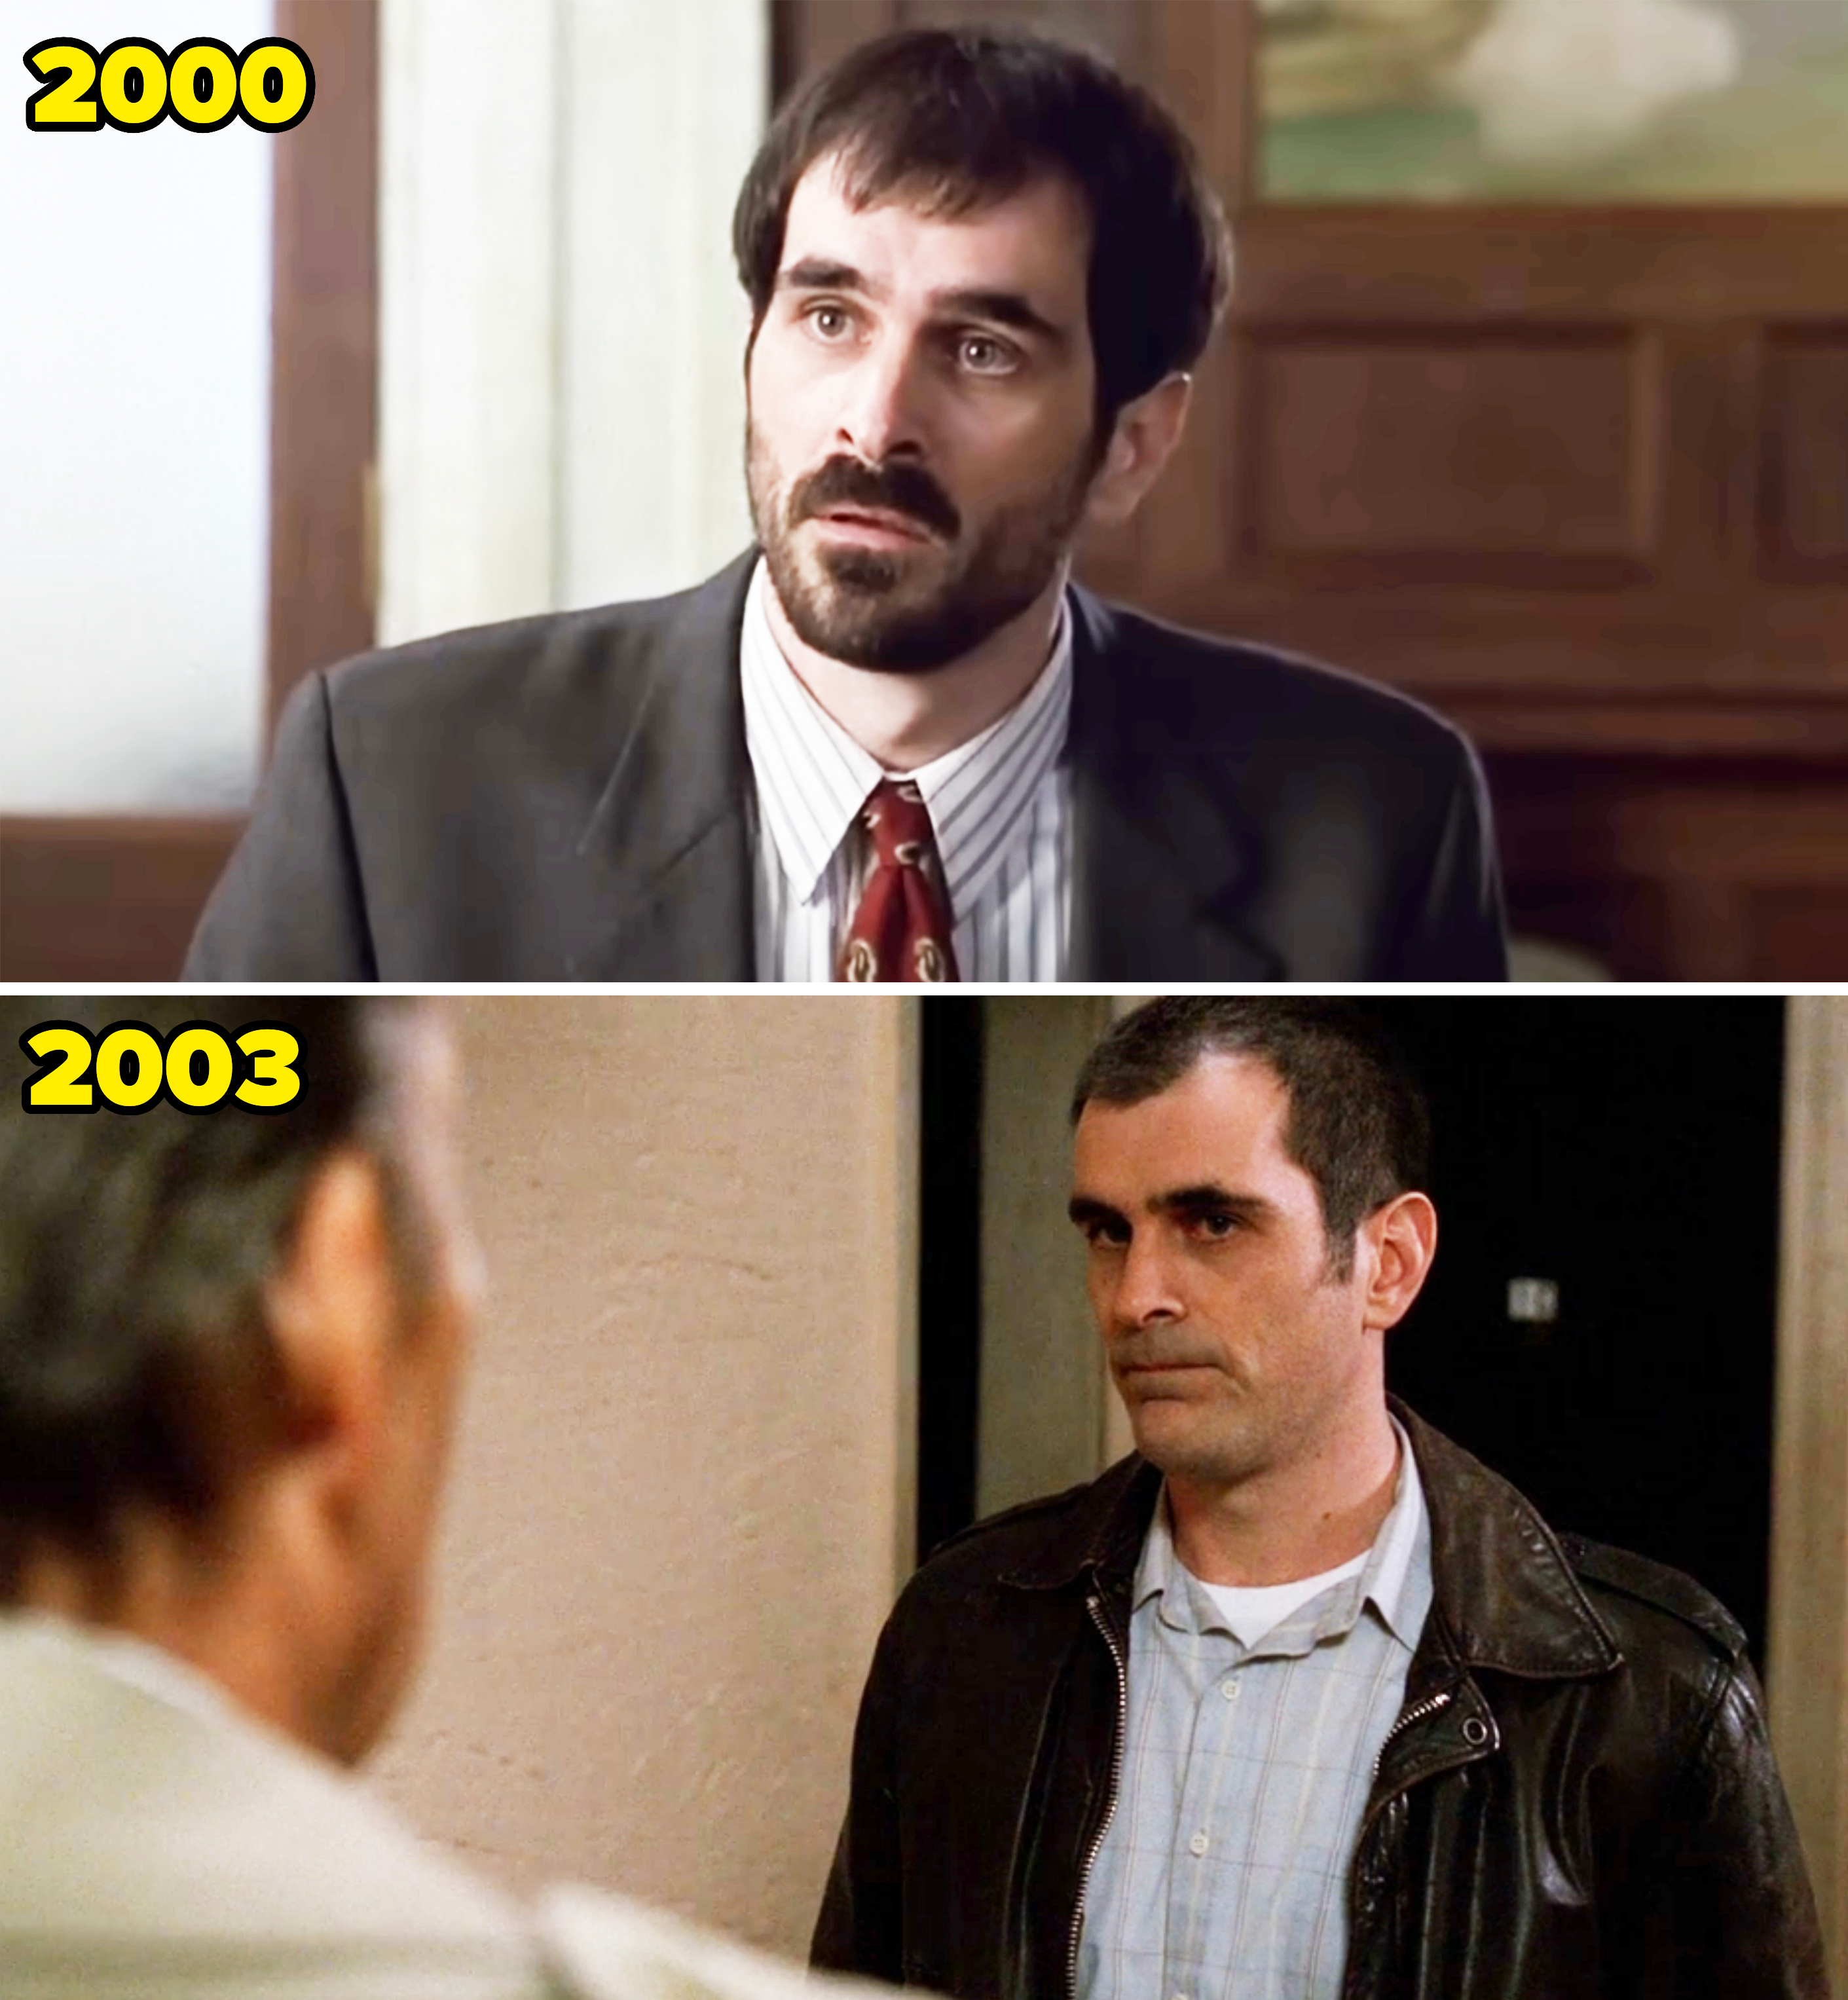 him in 2000 and 2003